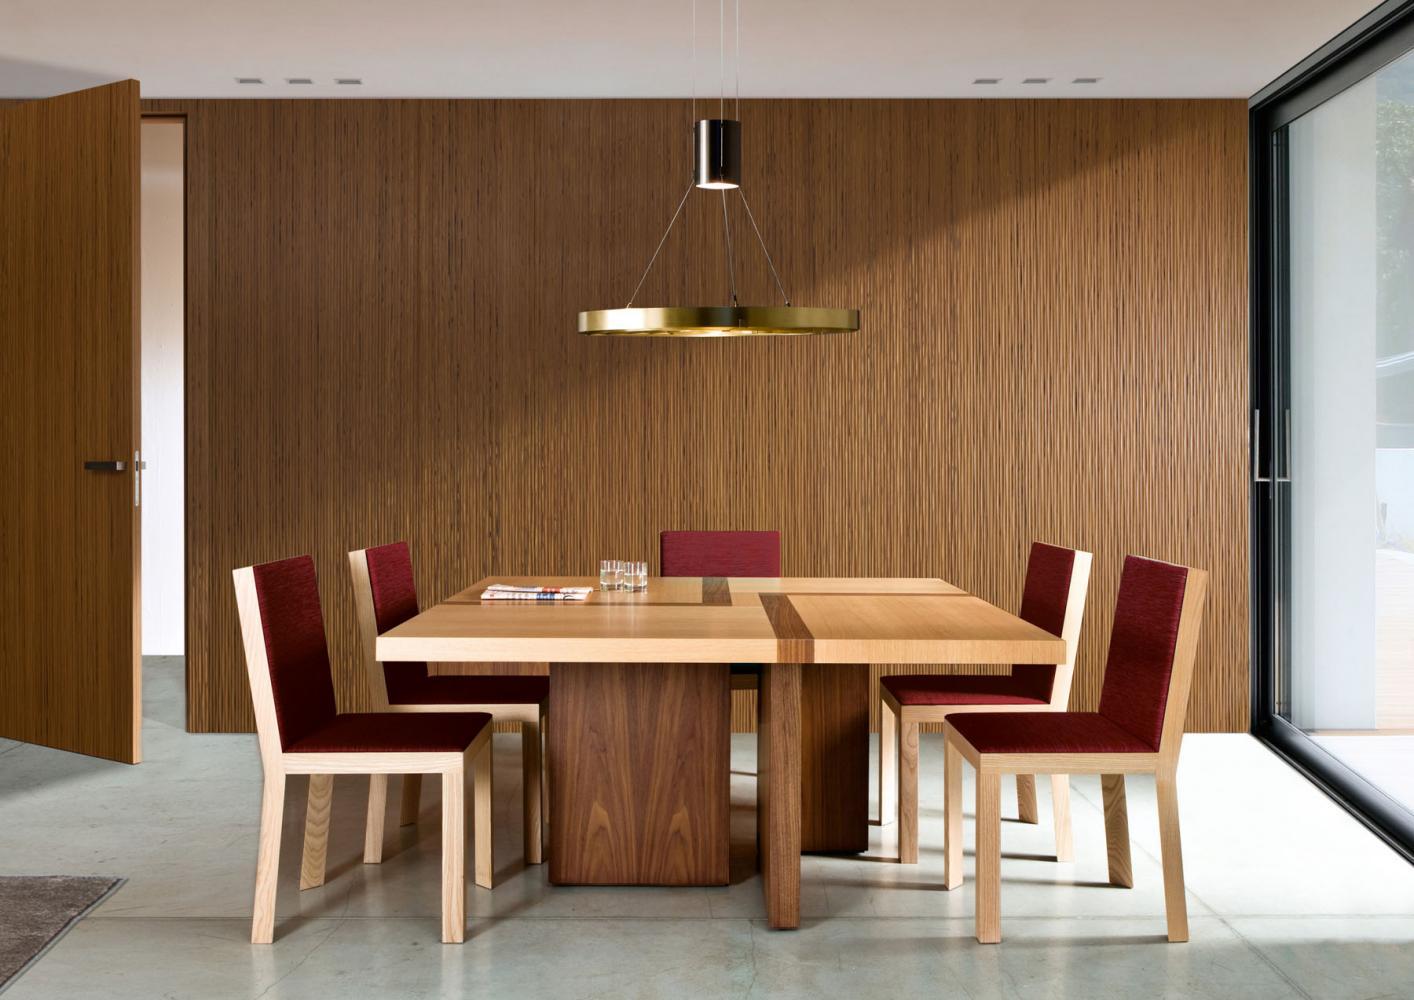 Laurameroni luxury modern made to measure bespoke rectangular, squared tables for contemporary interior decor and design